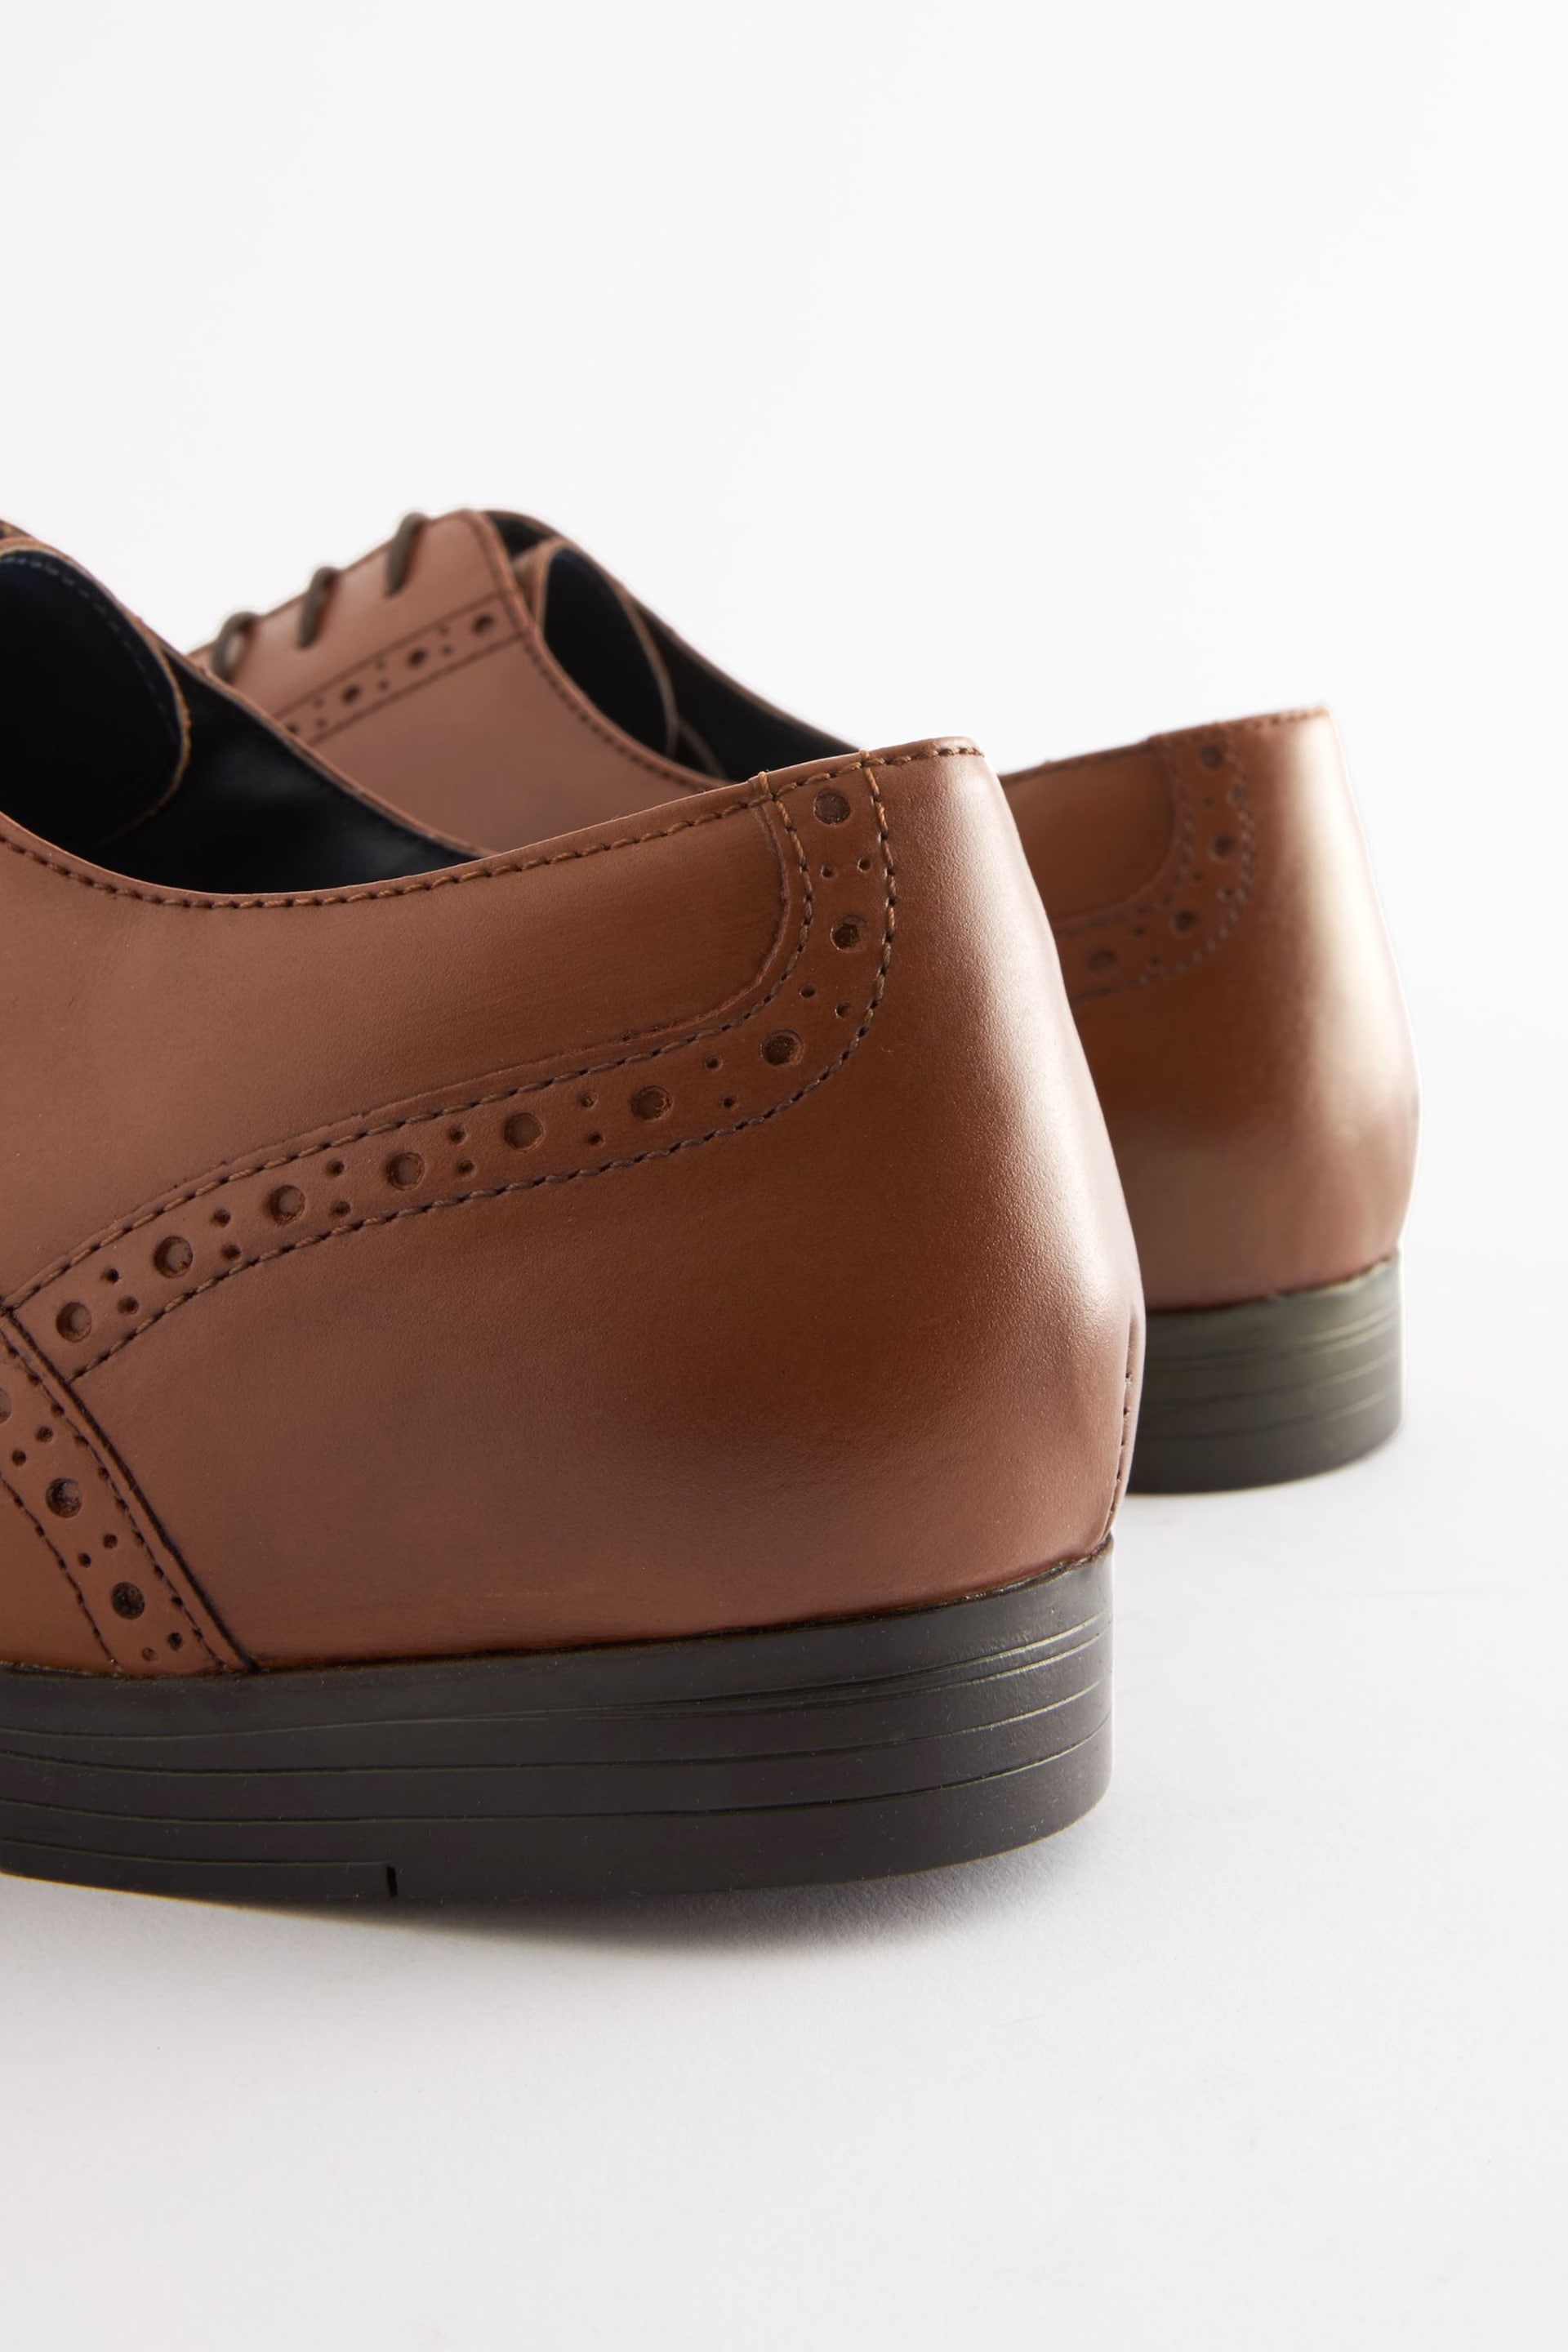 Tan Brown Wide Fit Leather Oxford Brogue Shoes - Image 4 of 6